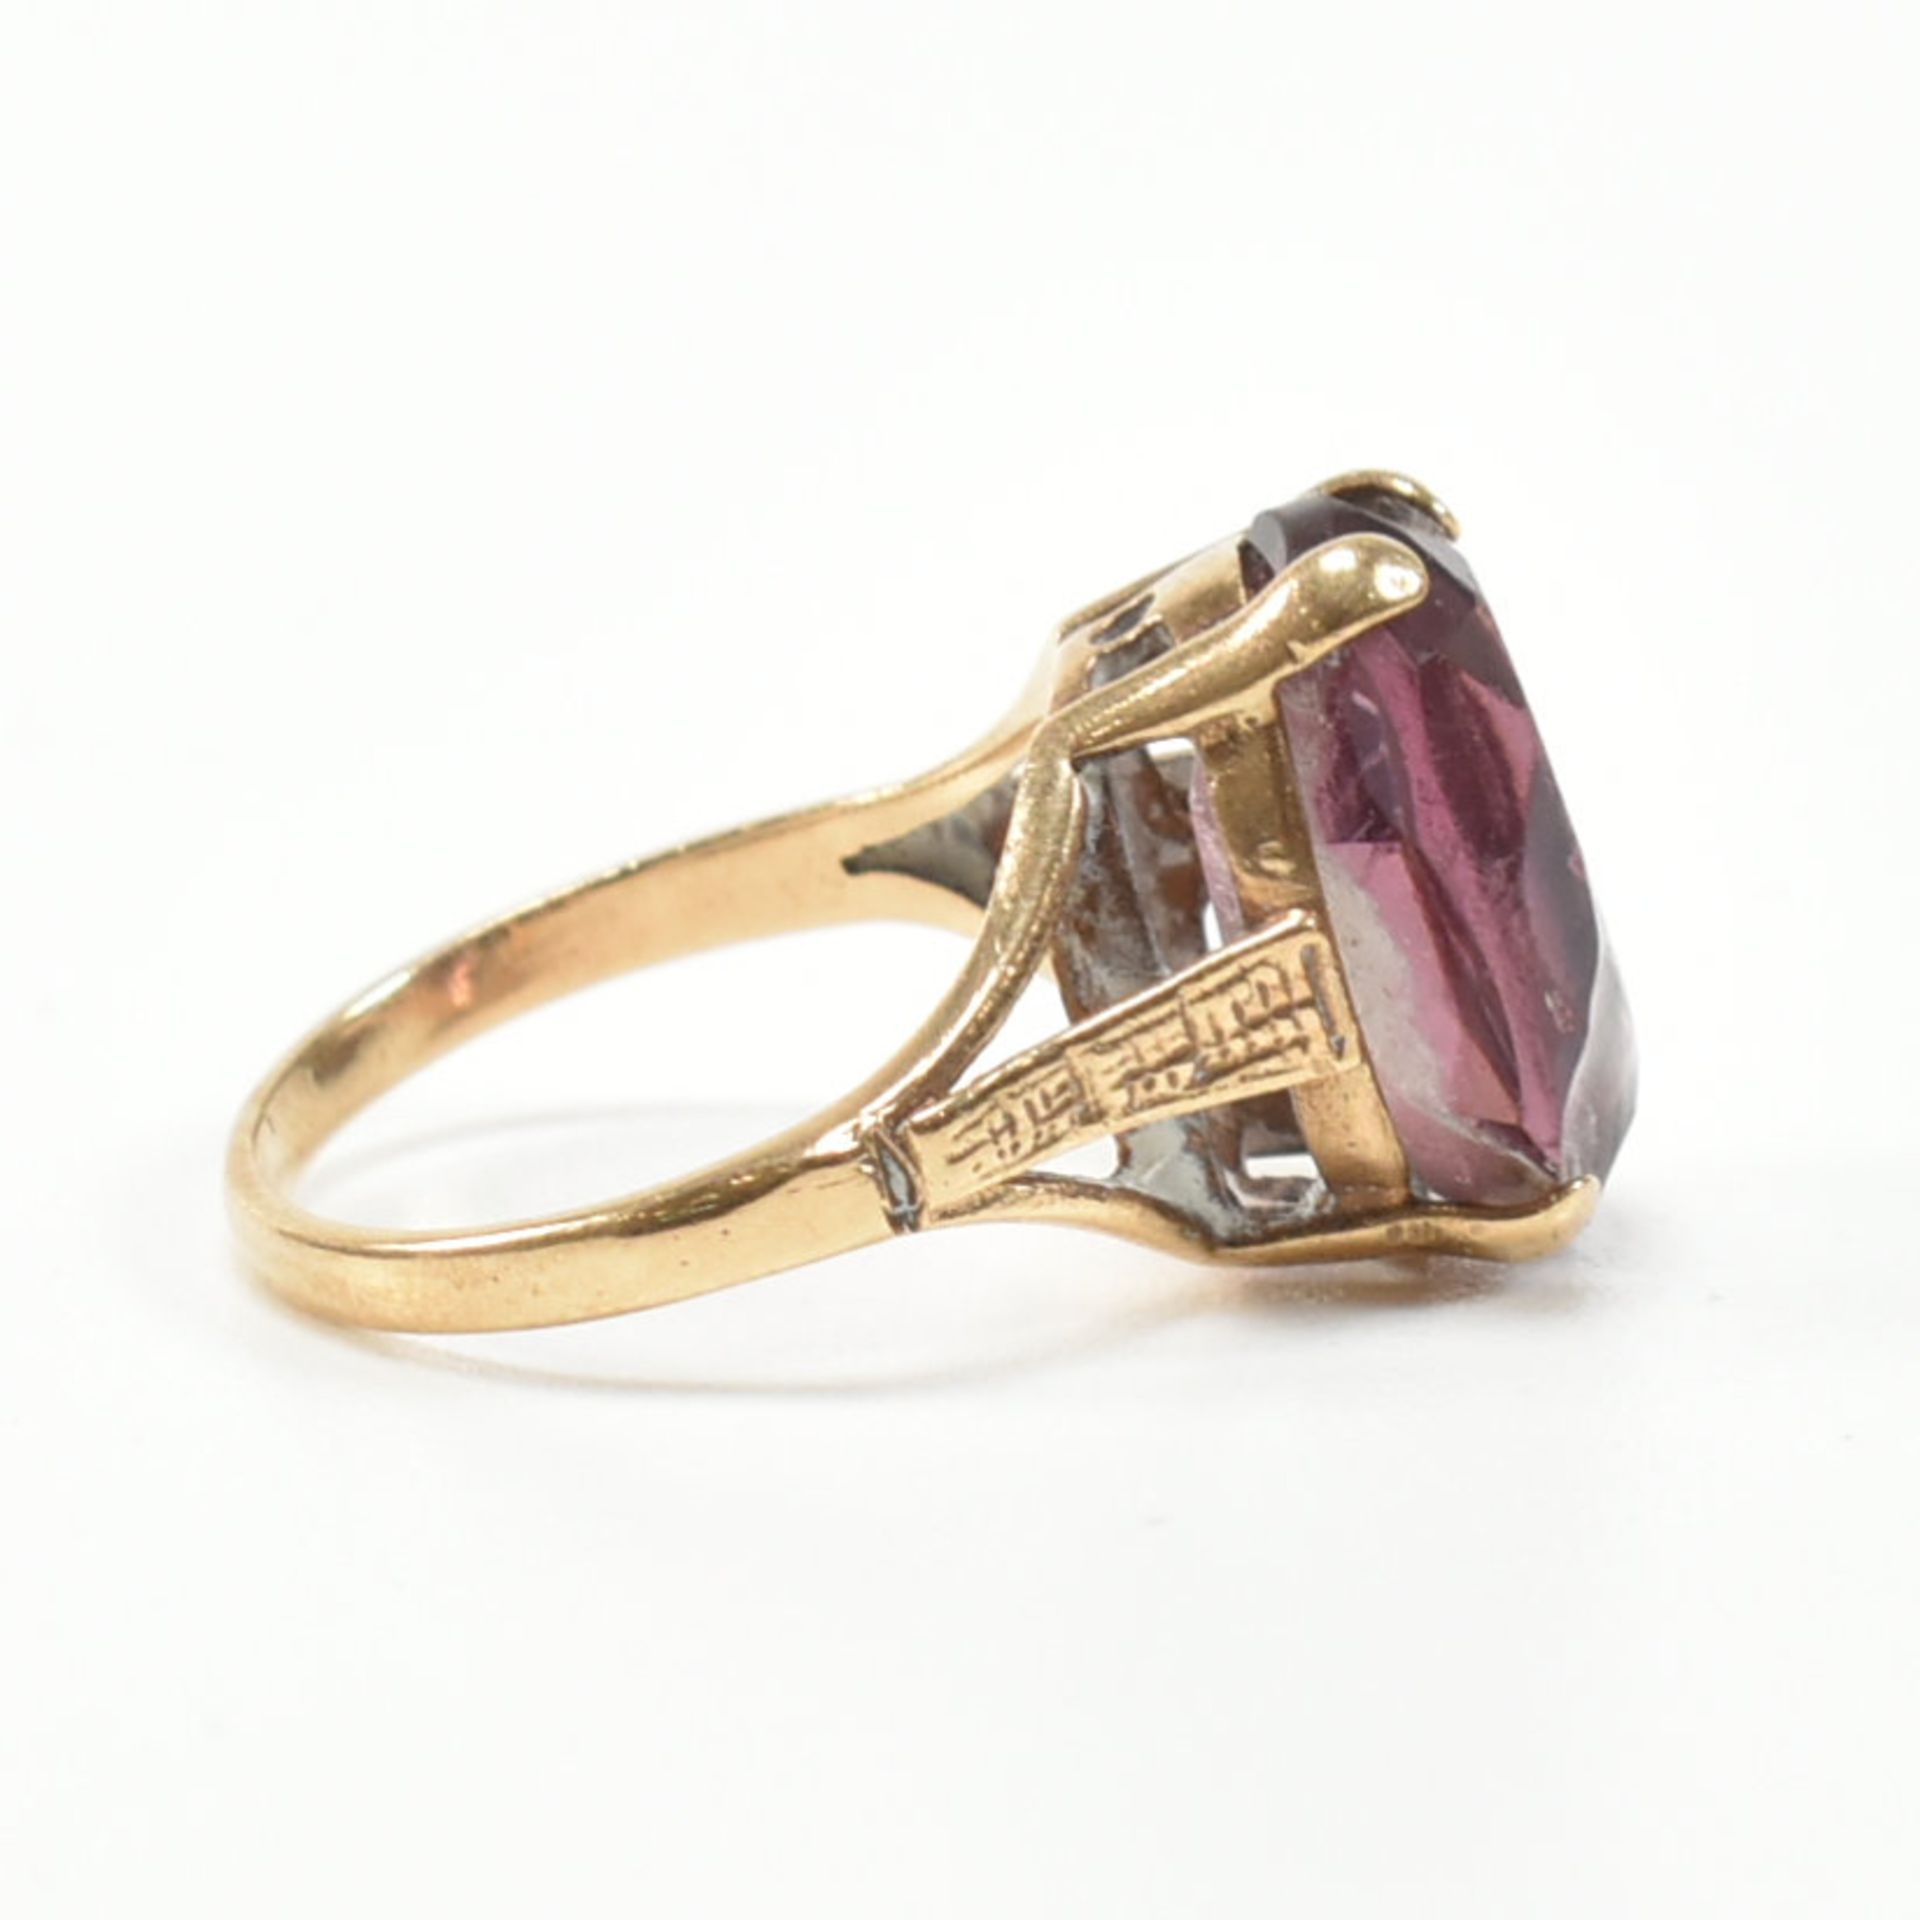 VINTAGE 9CT GOLD & PURPLE STONE RING - Image 7 of 9